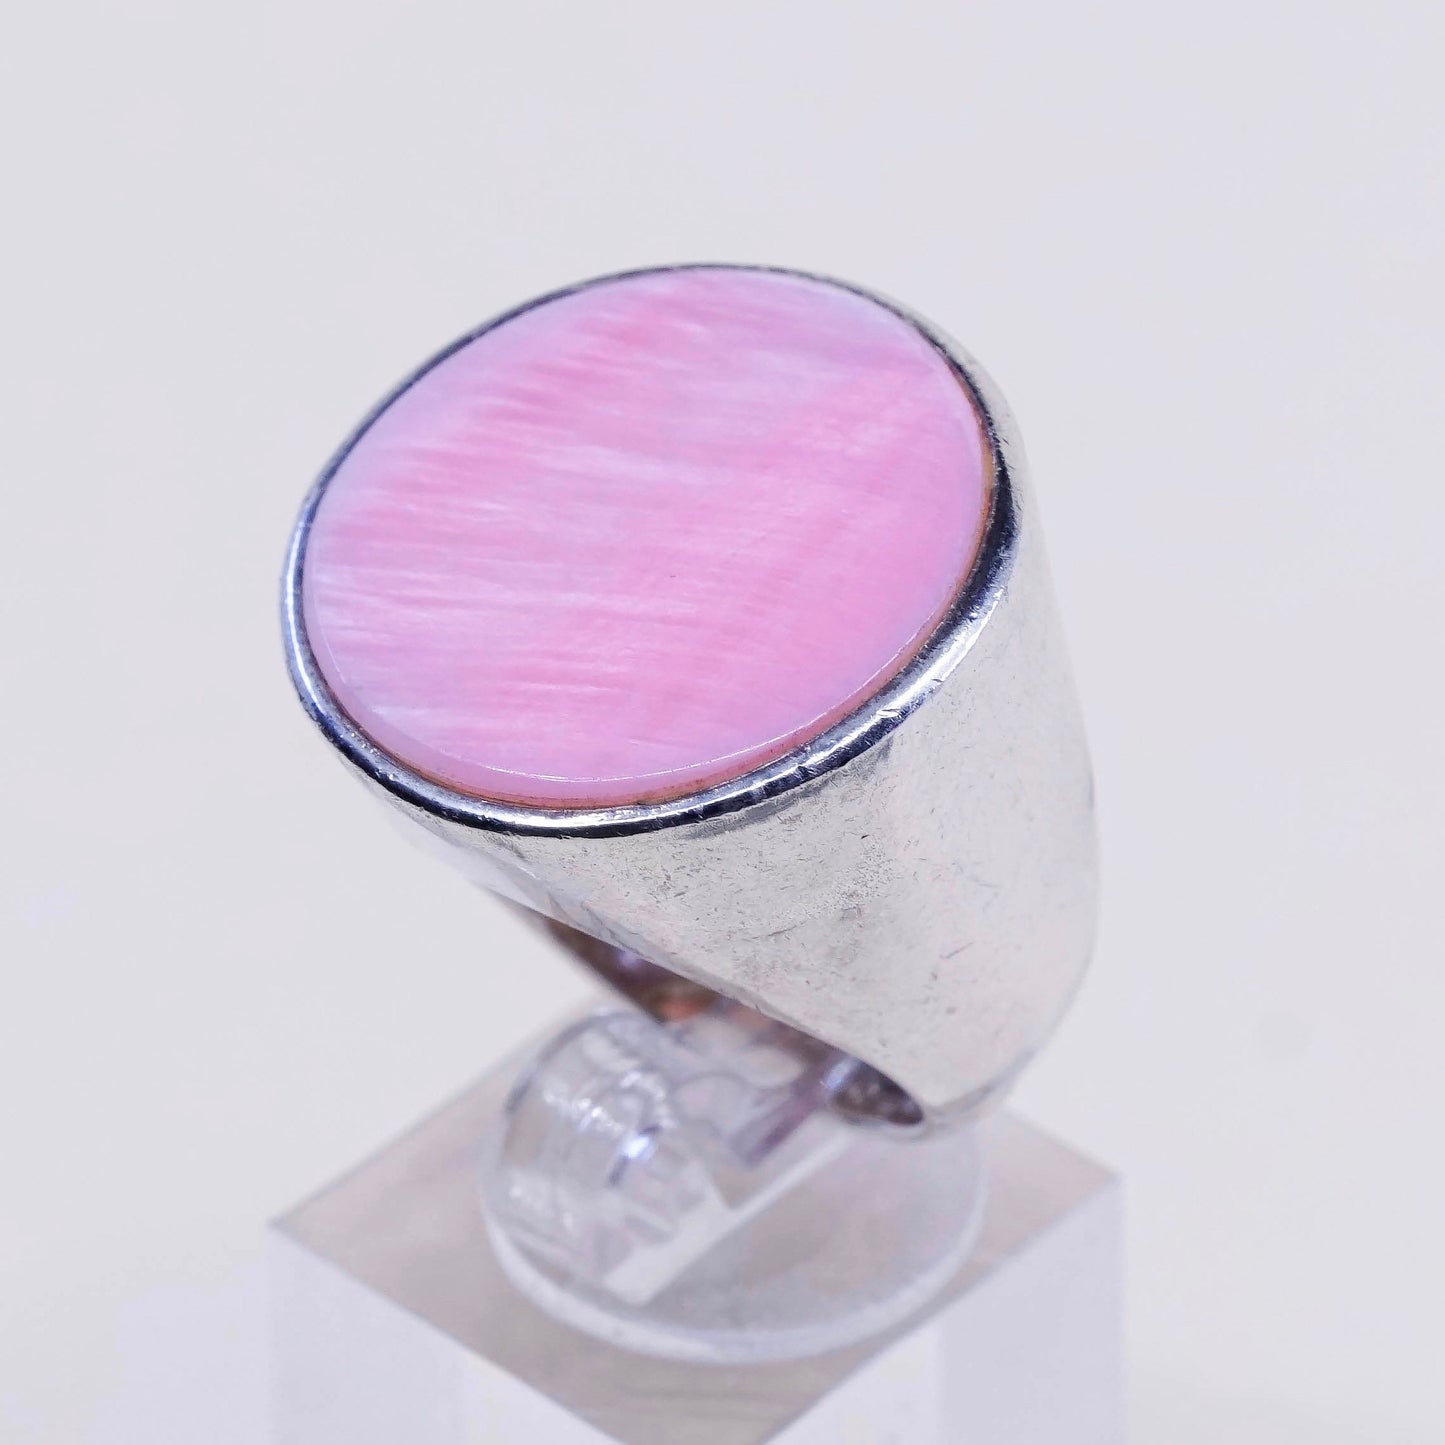 sz 7.25, mexico PB sterling silver handmade ring w/ round pink mother of pearl